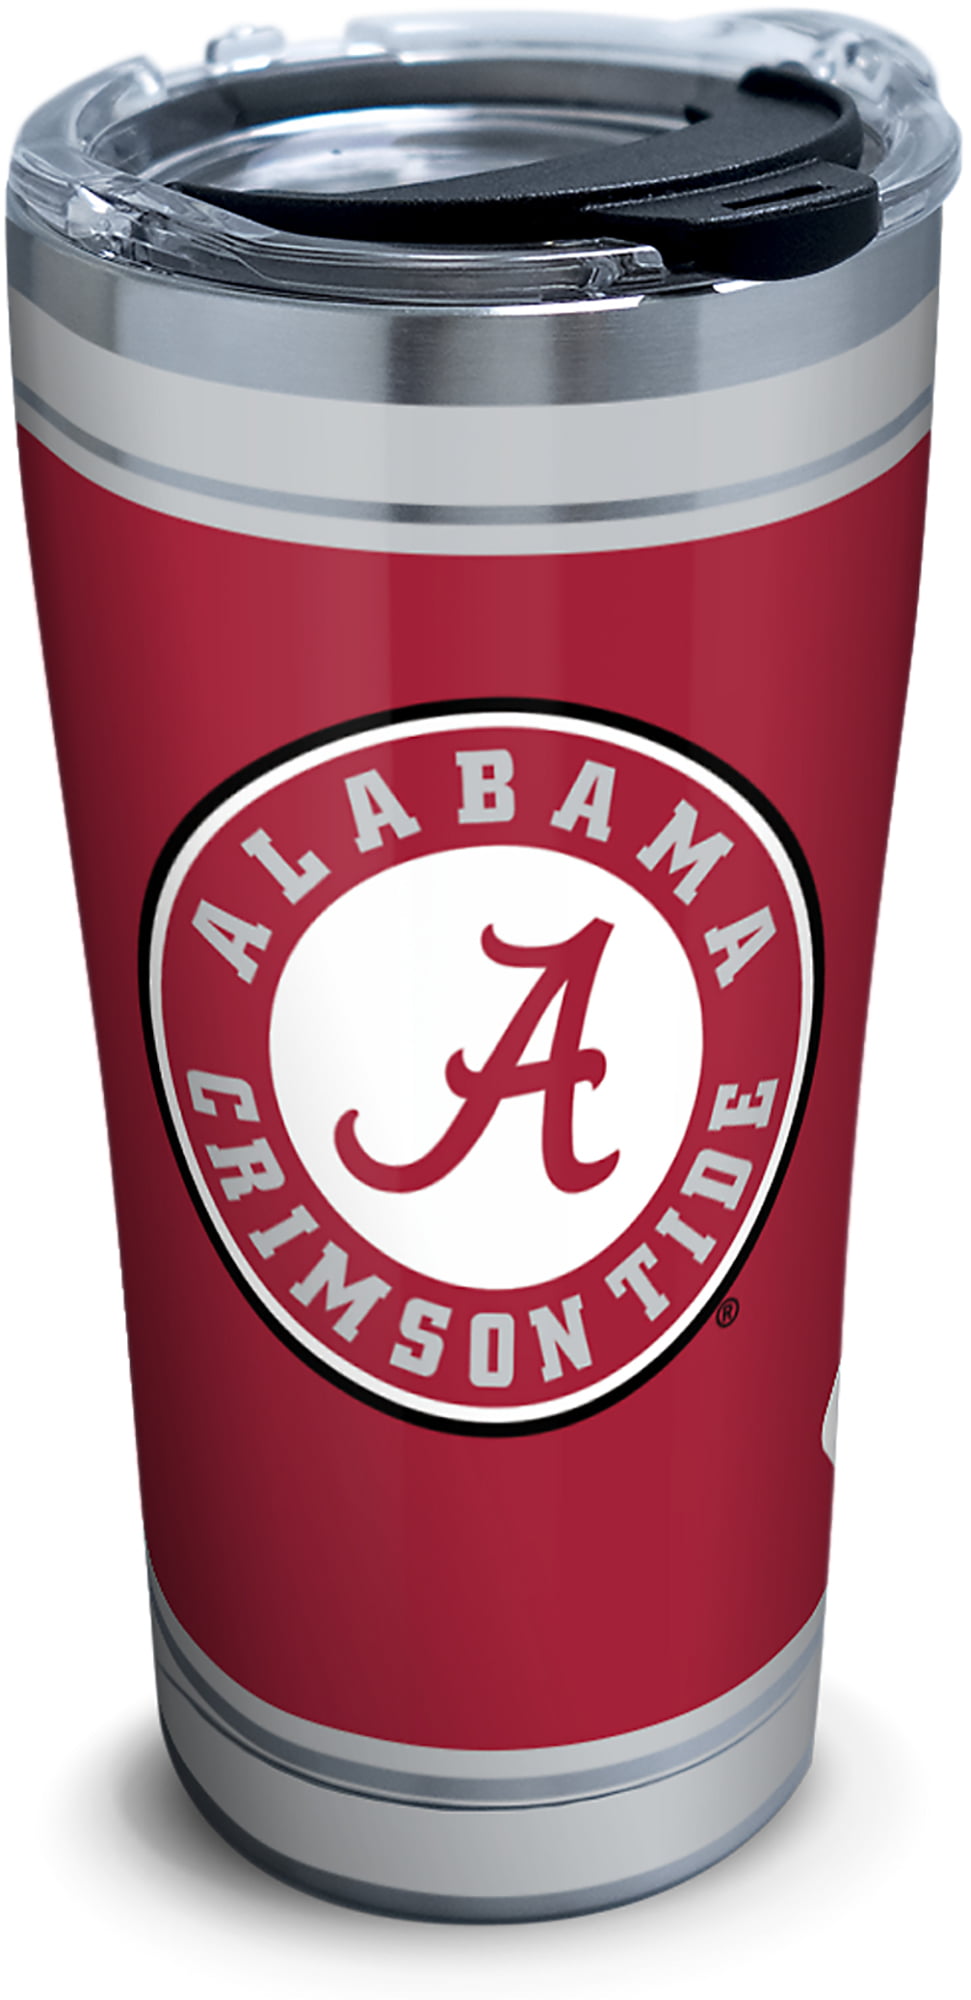 Tervis University of Alabama Tradition 20 oz. Stainless Steel